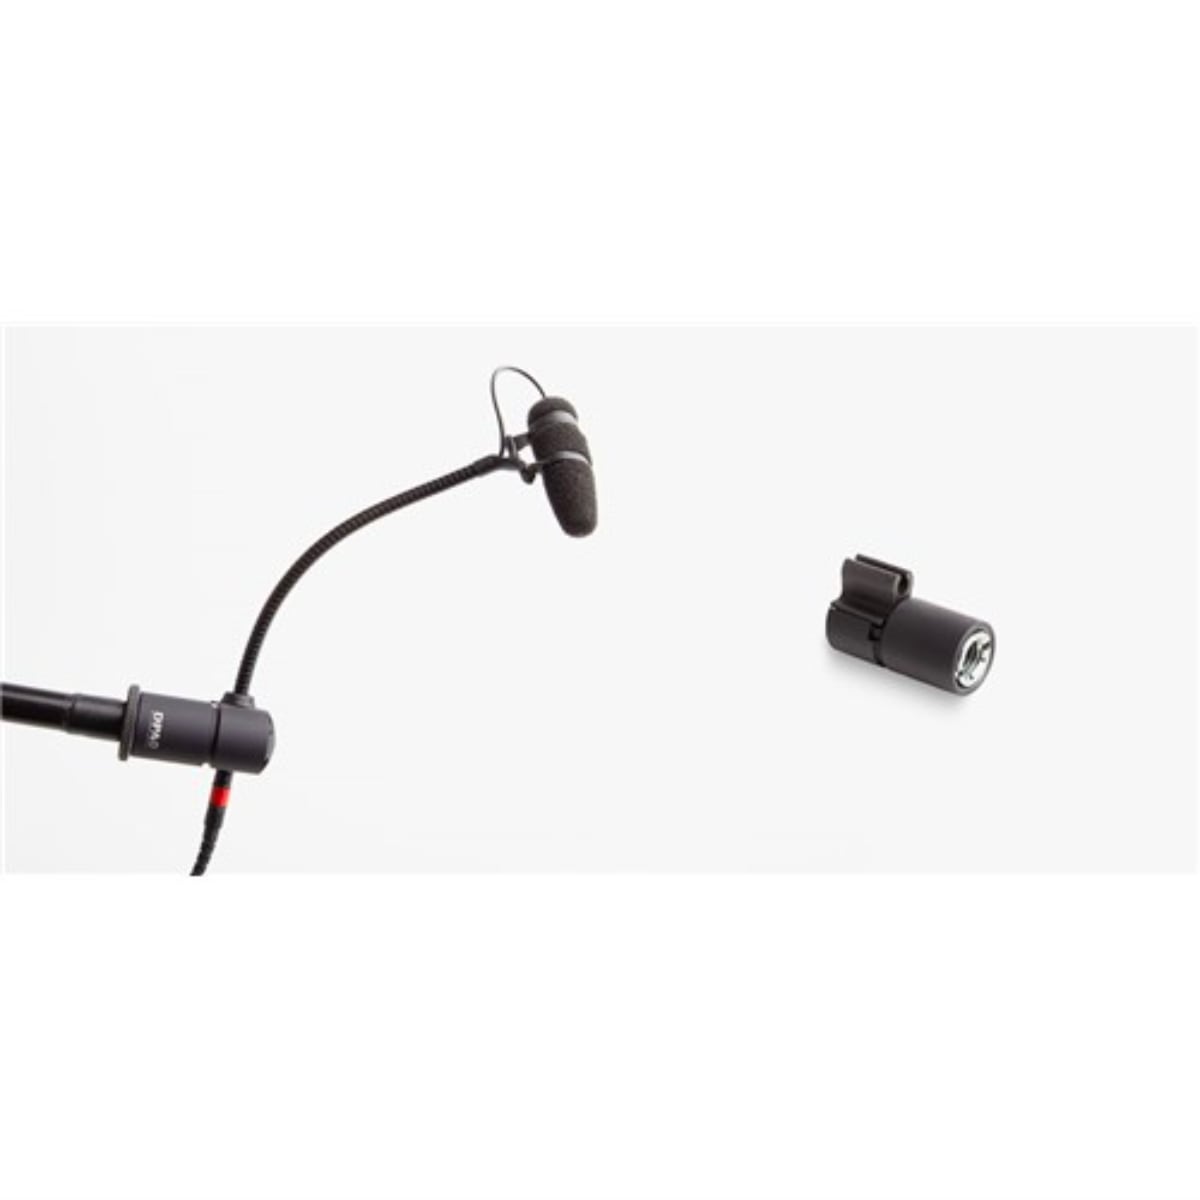 DPA 4099 Core Mic - Loud SPL with Mic Stand Mount 3/8" and 5/8" Thread